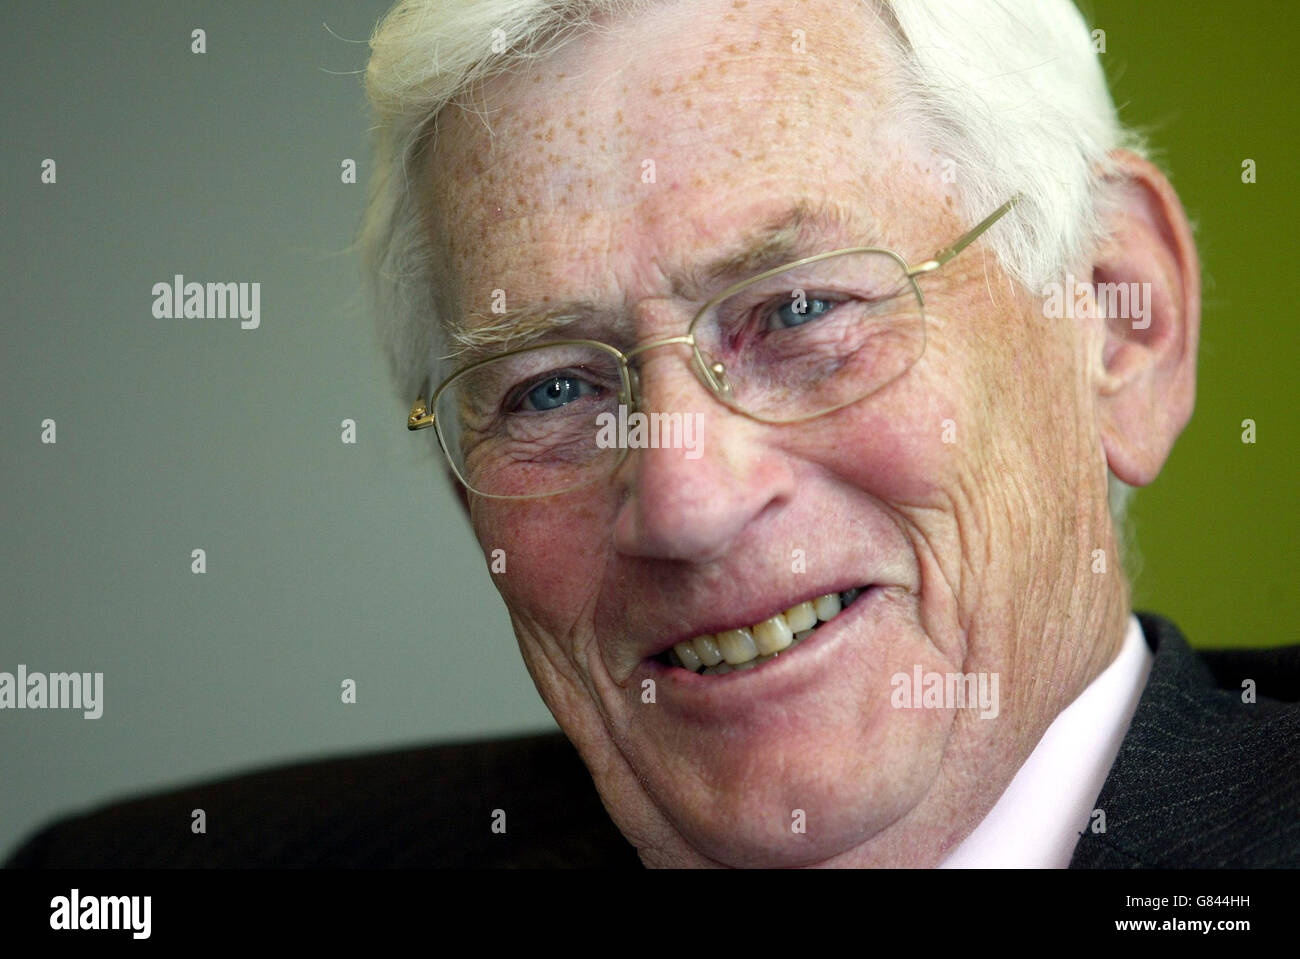 Former Stormont Deputy First Minister Seamus Mallon speaks during a press conference at party headquarters. He claimed that Northern Ireland faces a Balkan-style polarised society if Sinn Fein and the DUP prosper in the General Election. Stock Photo